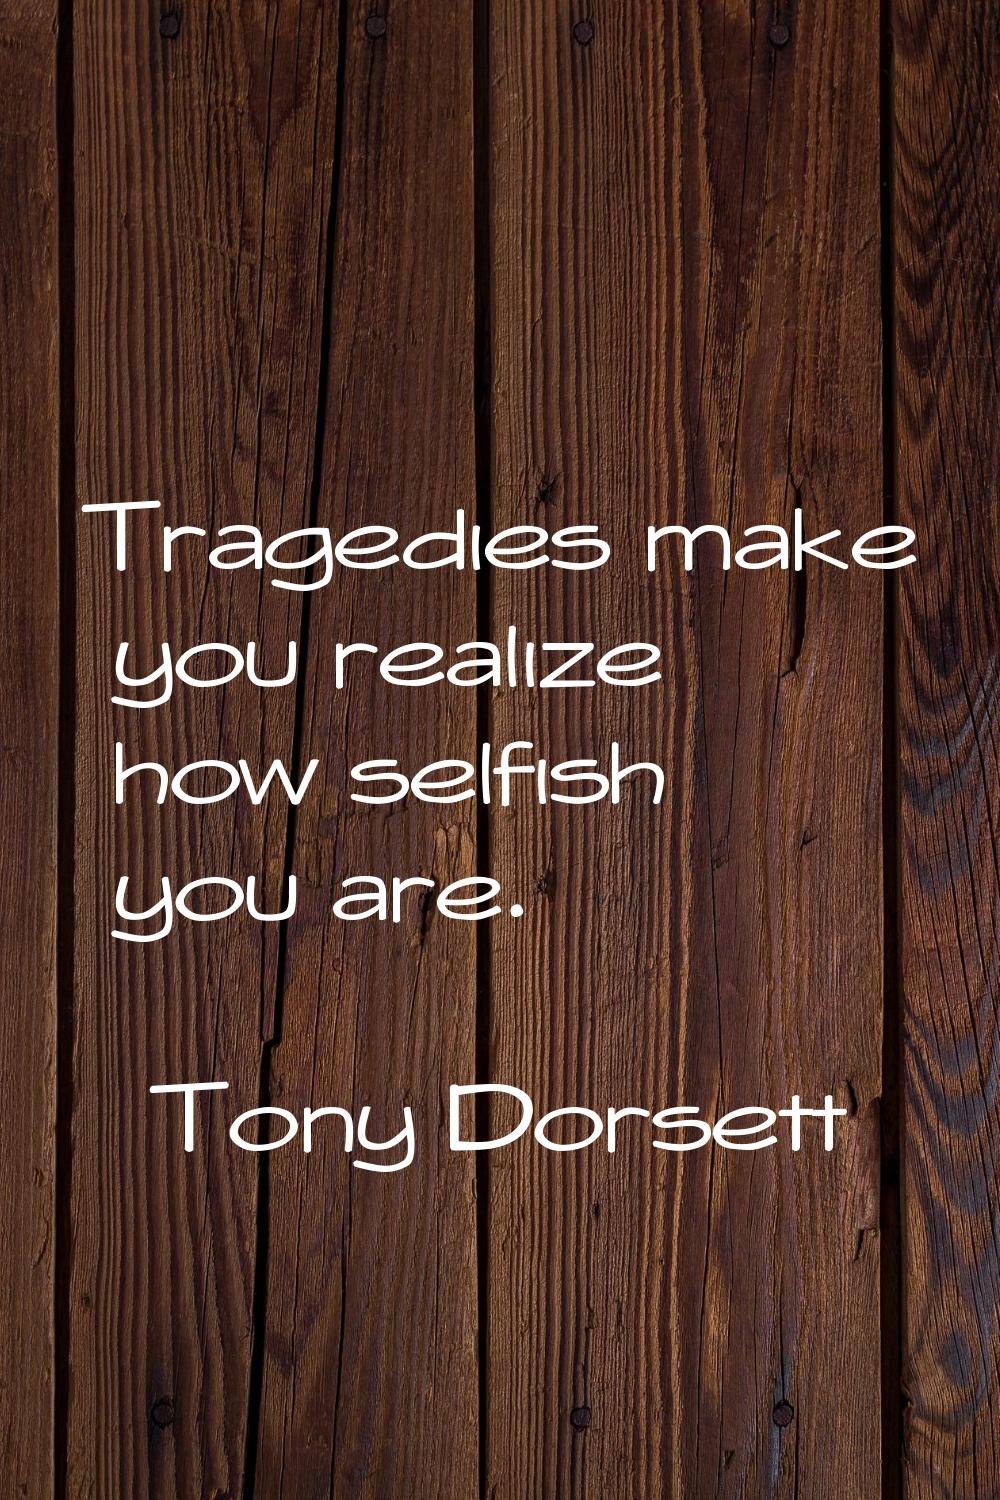 Tragedies make you realize how selfish you are.